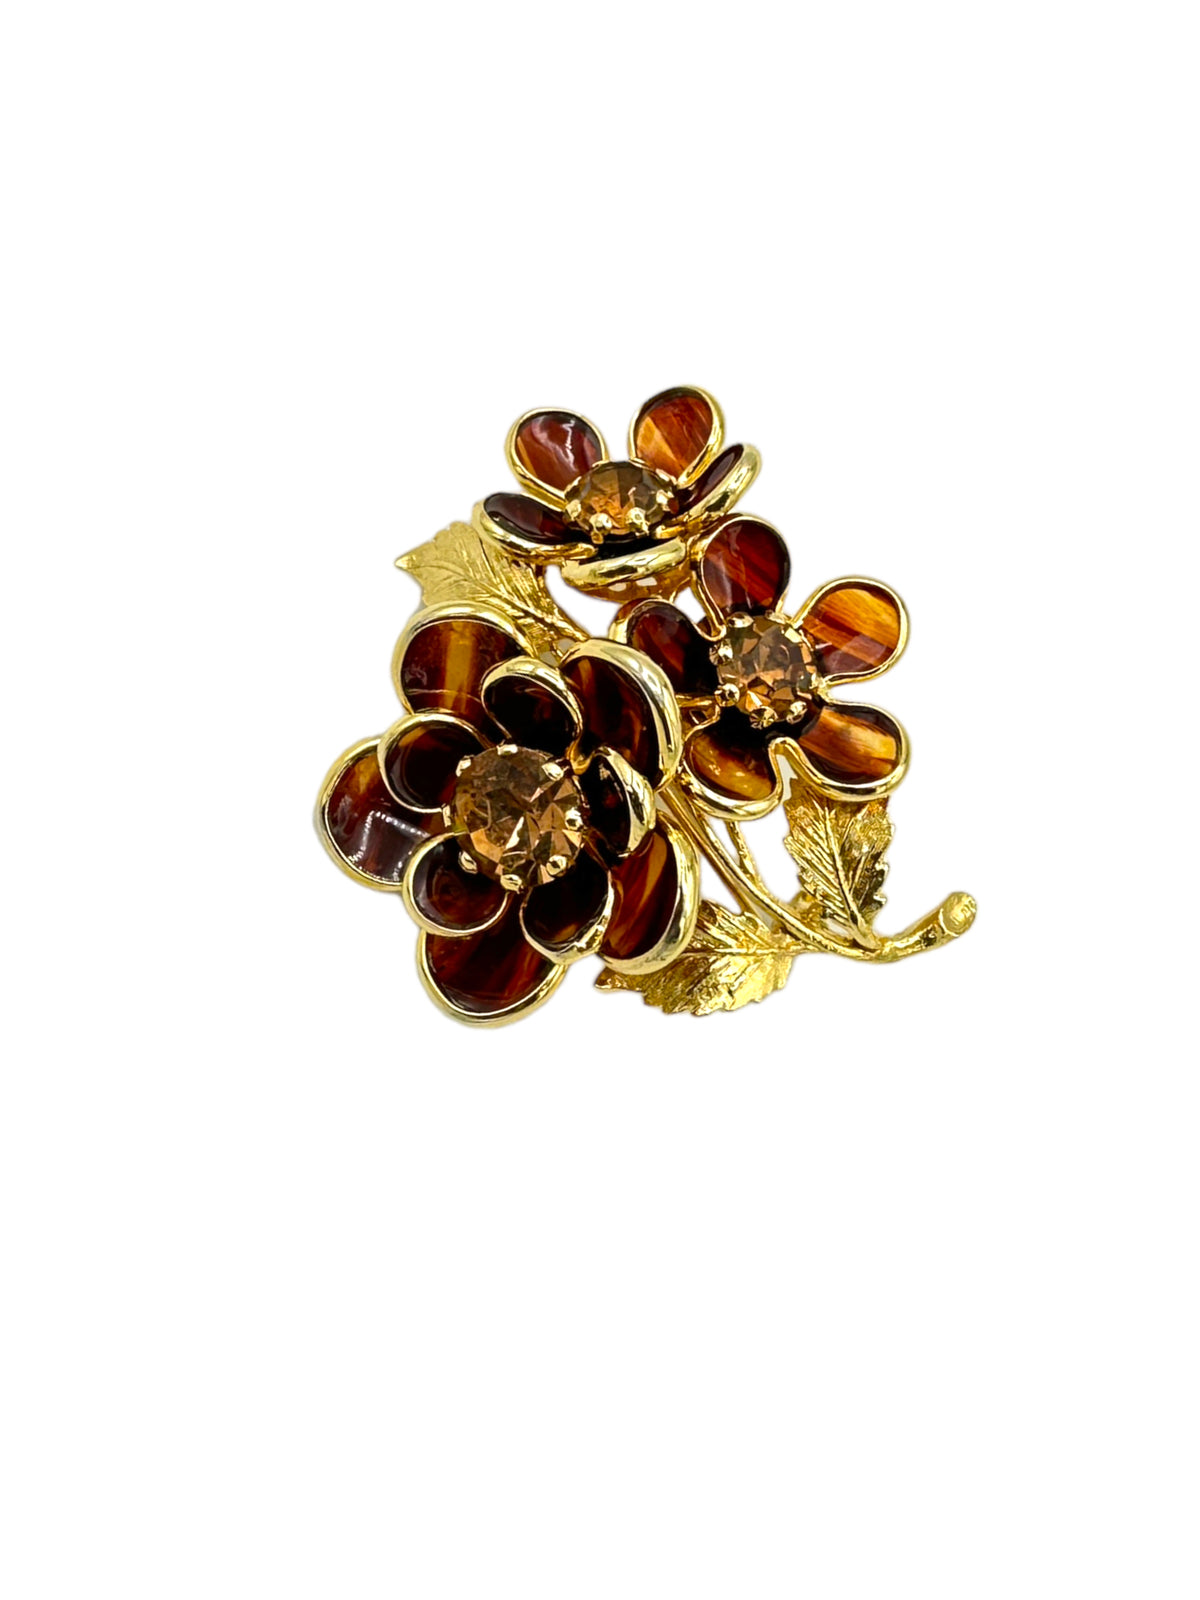 Layered Floral Tortoise Shell Brown Petal Brooch